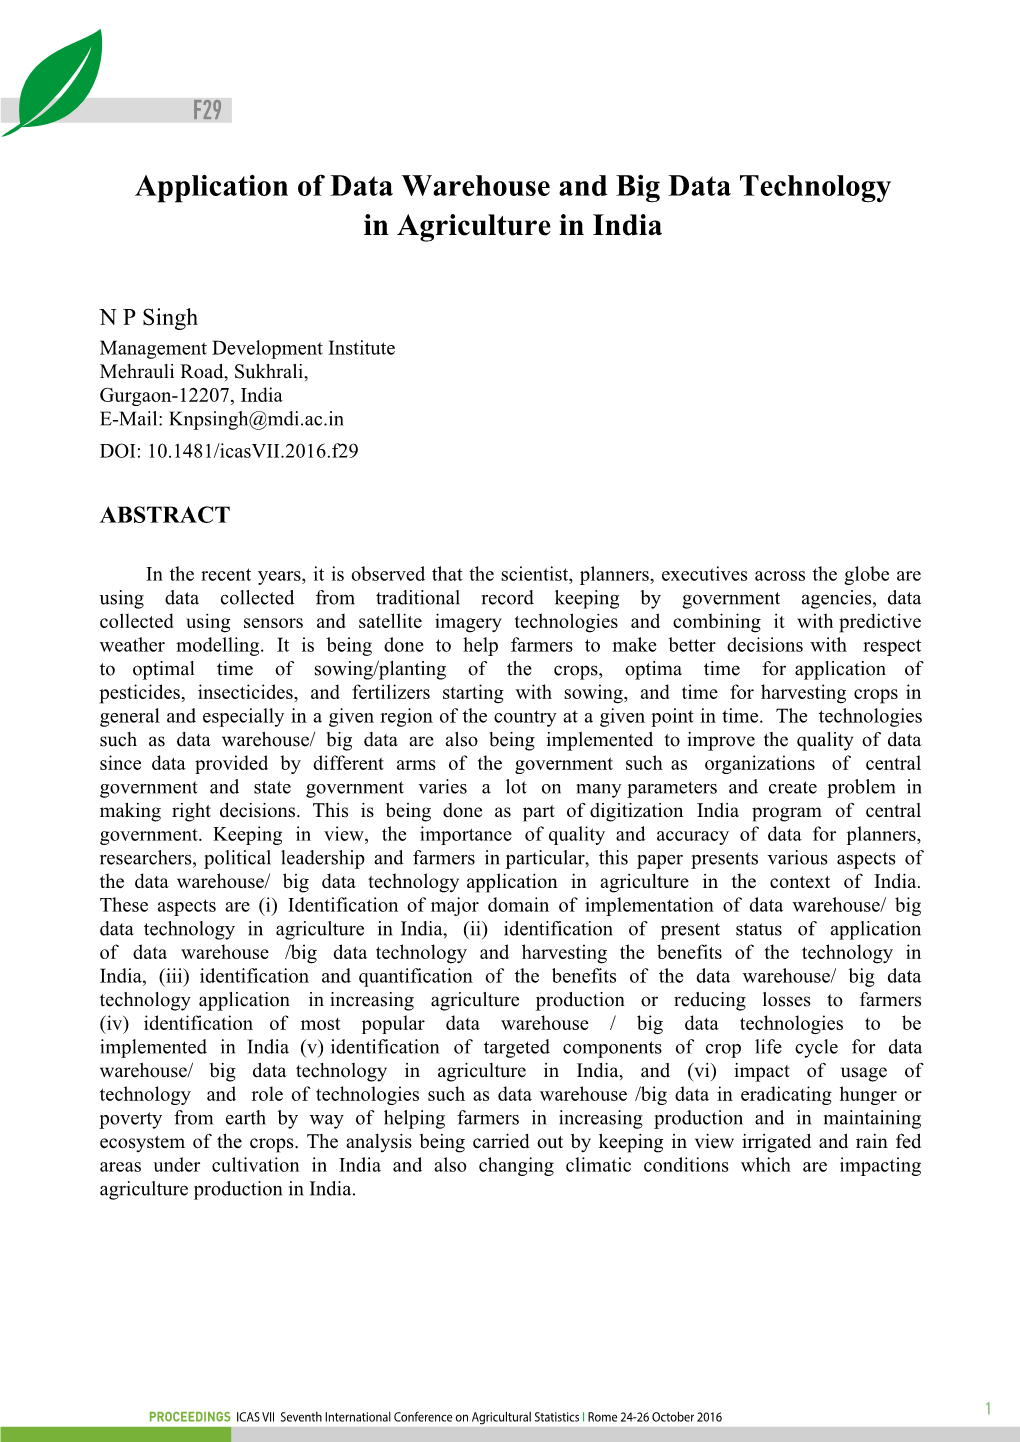 Application of Data Warehouse and Big Data Technology in Agriculture in India